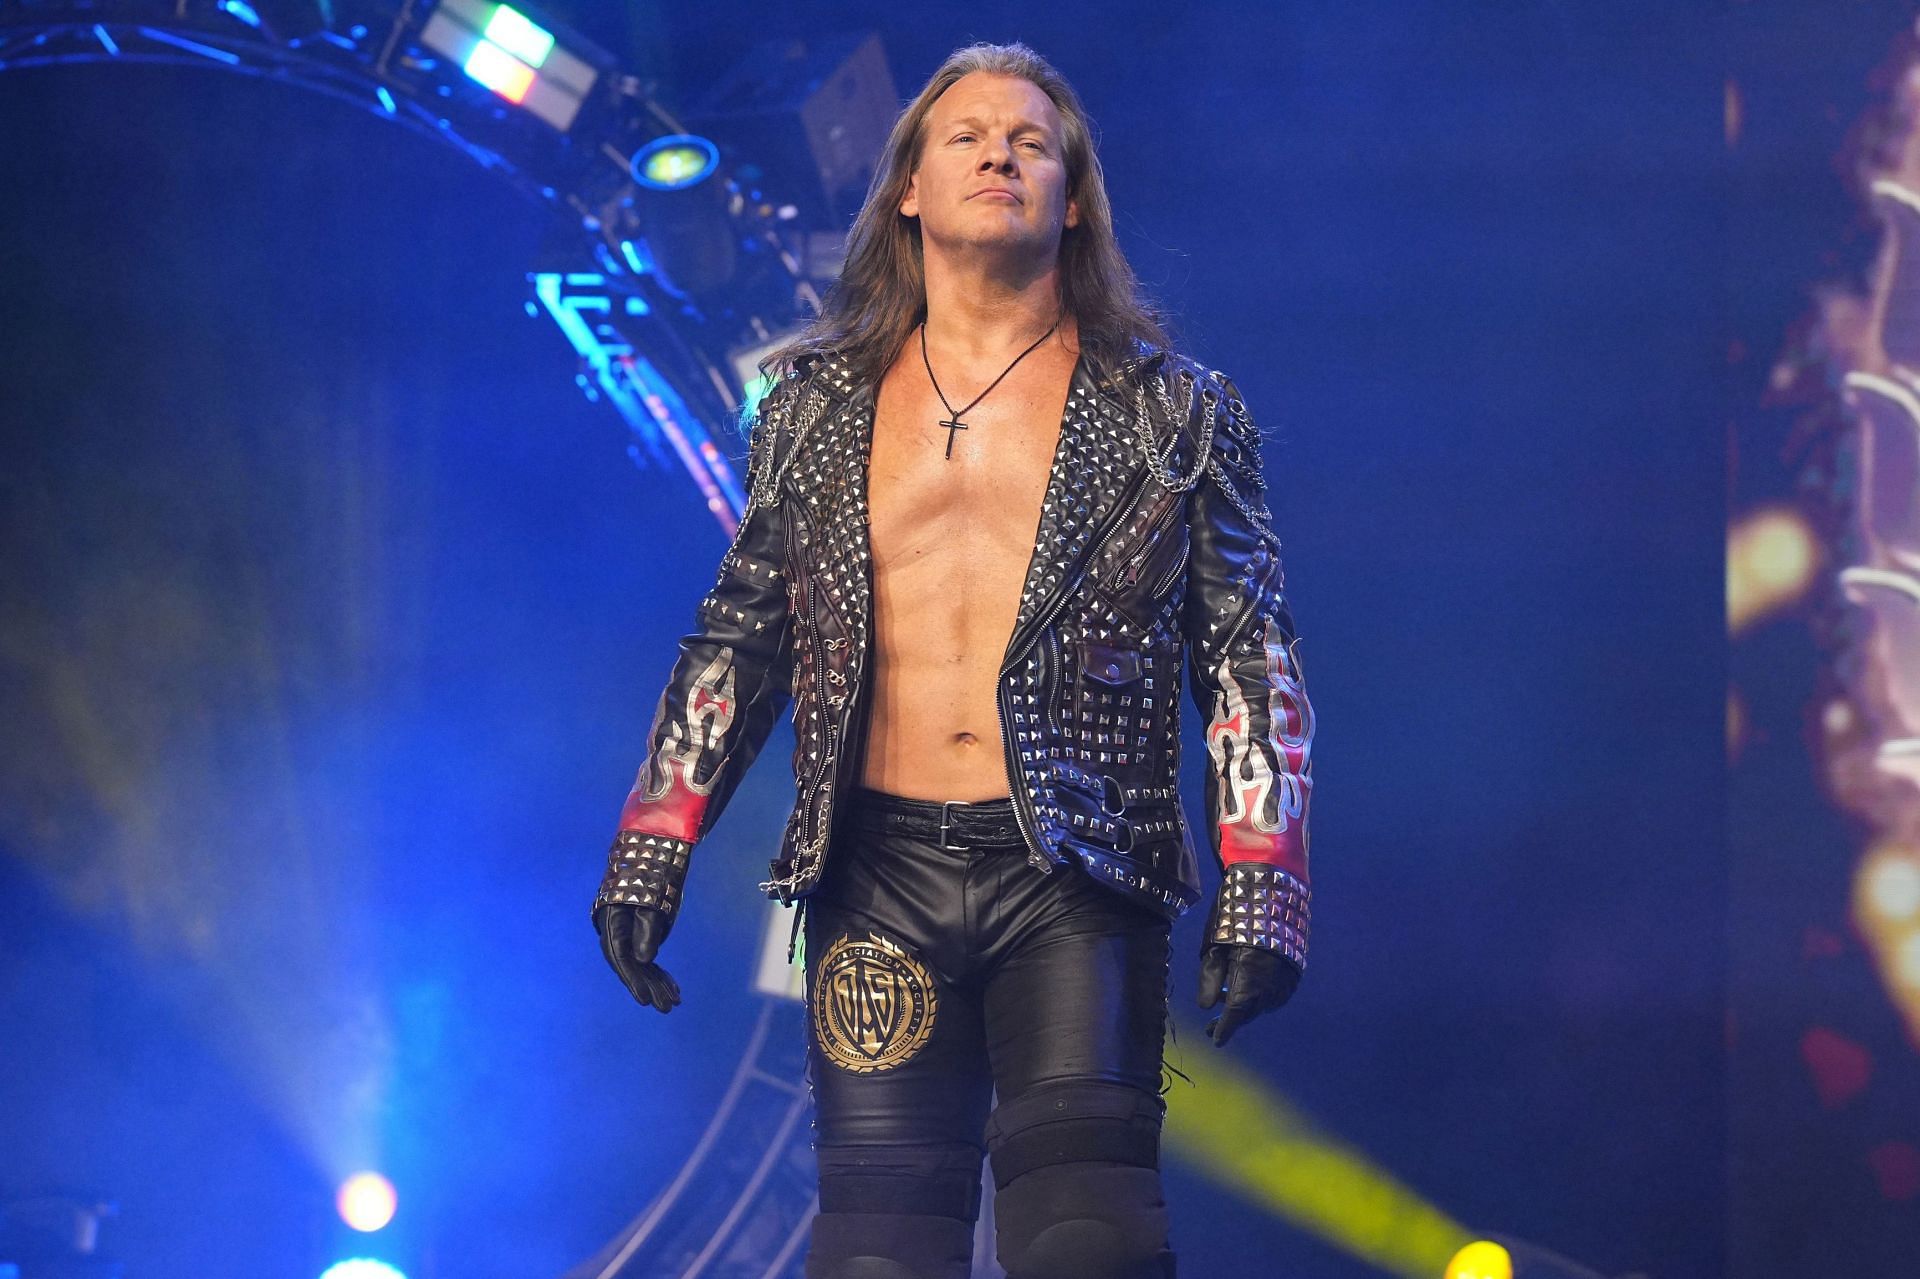 Chris Jericho is still performing at the highest level